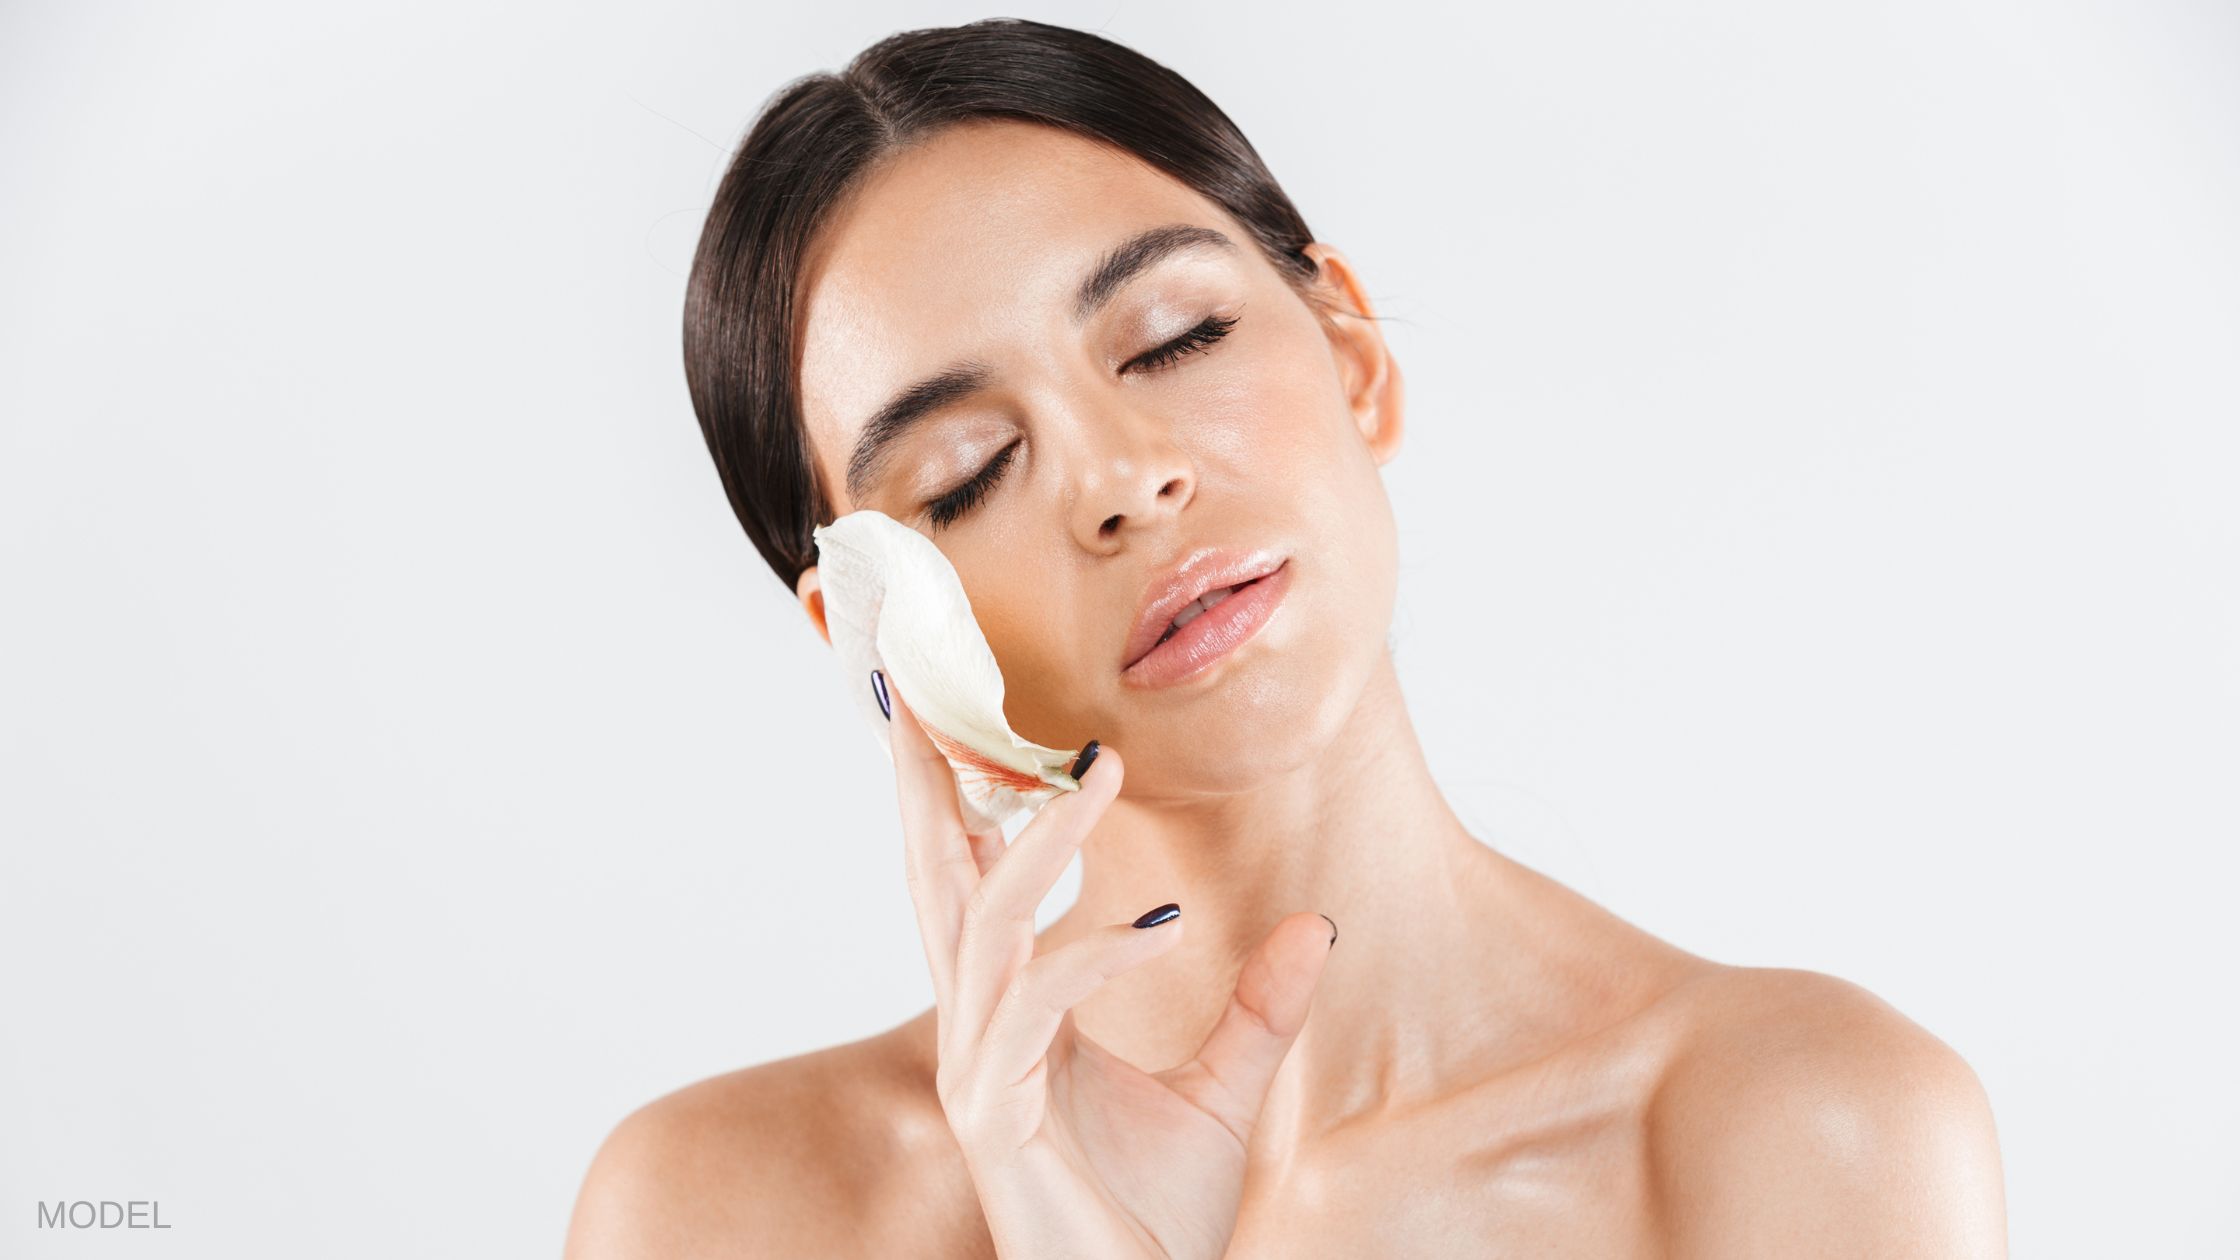 Woman with eyes closed holding a flower petal to her face. (MODEL)